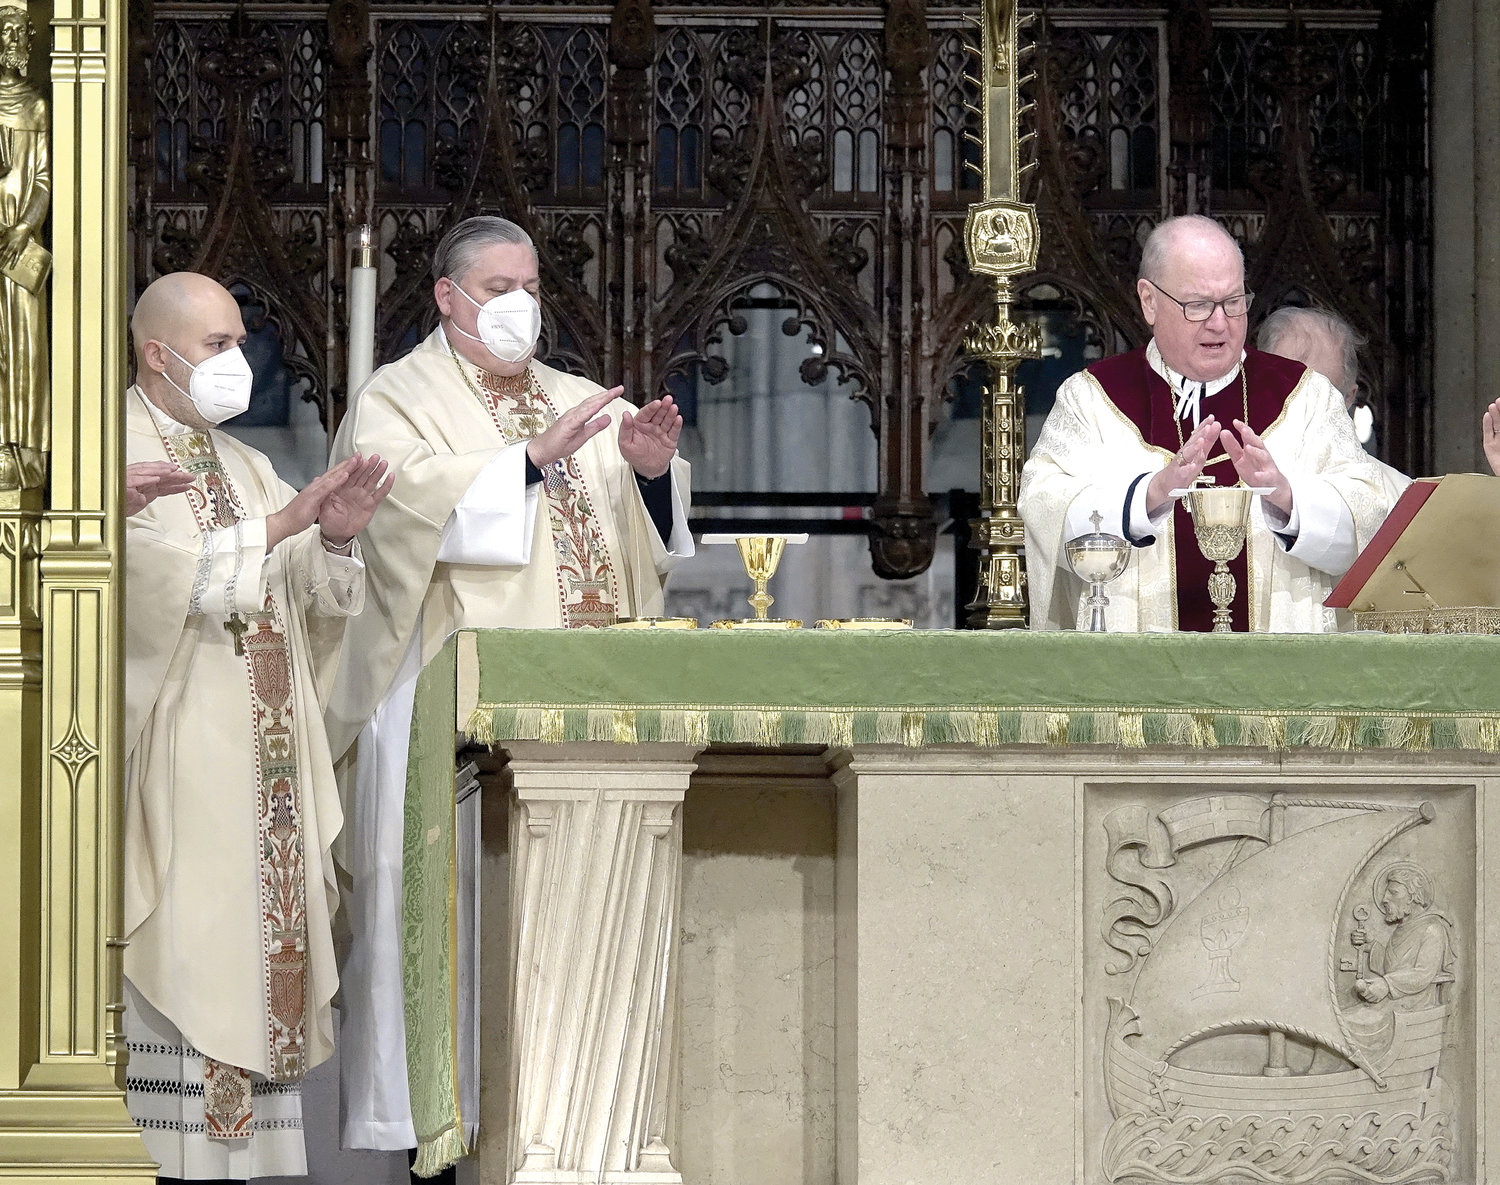 Bishop-elect Joseph Espaillat and Bishop-elect John Bonnici pray with Cardinal Dolan during morning Mass at St. Patrick’s Cathedral Jan. 25, the day their appointments as new auxiliary bishops for the archdiocese were announced.